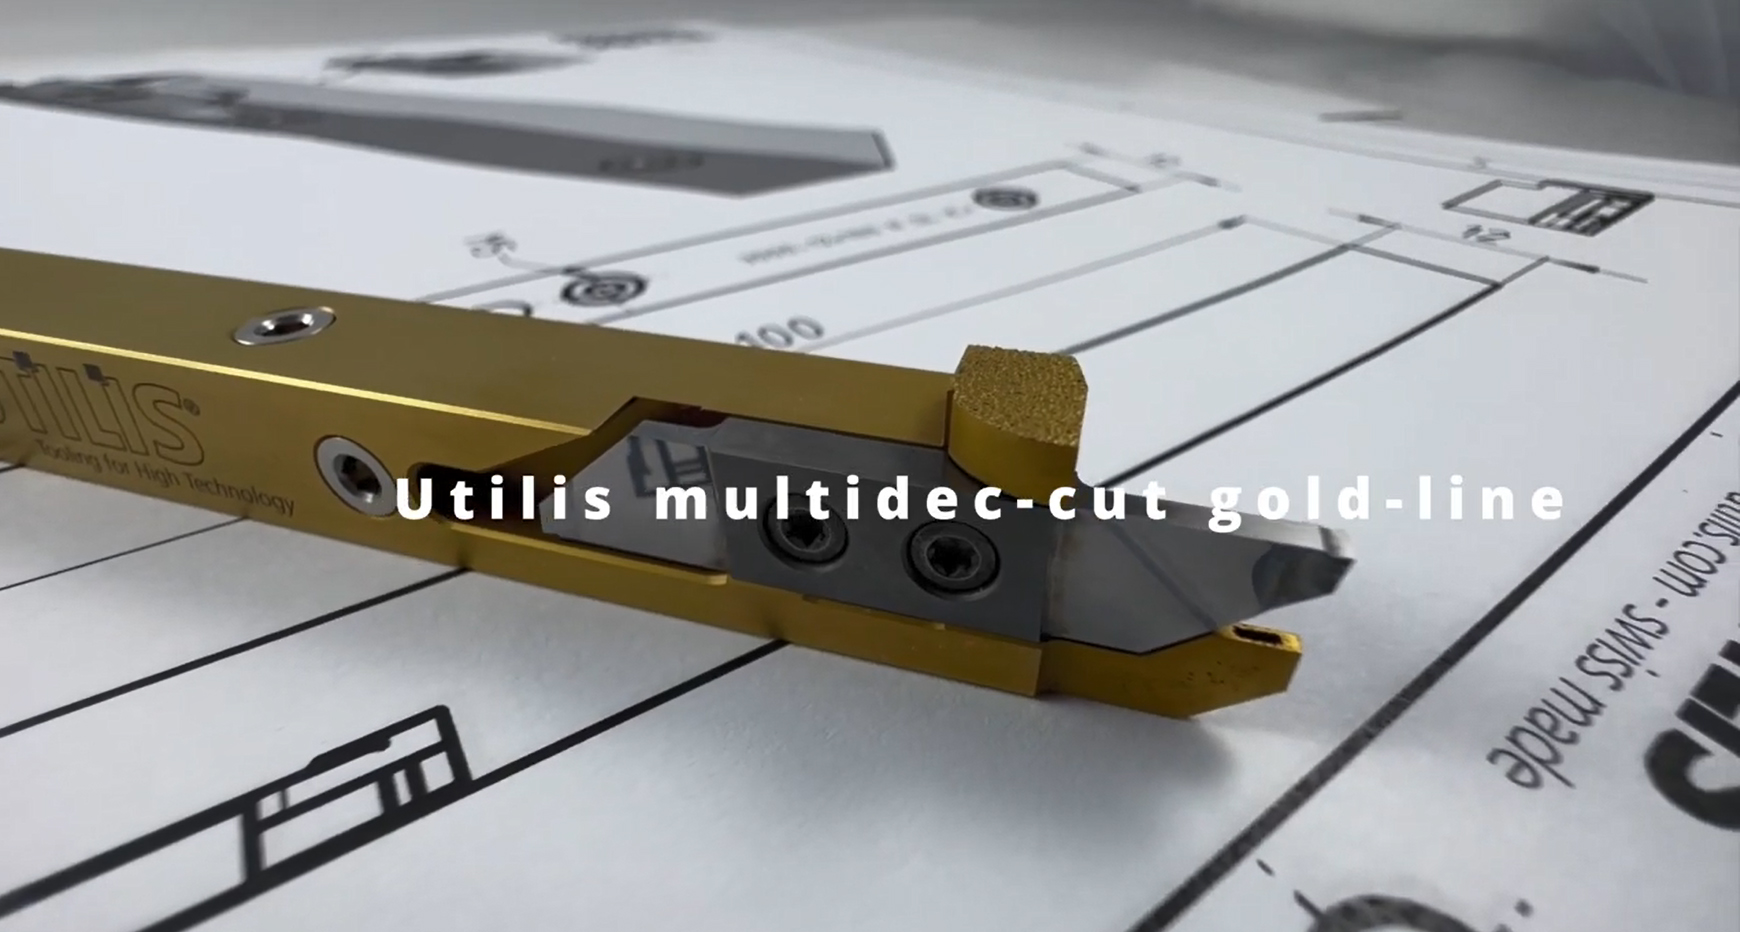 ColdMetalFusion – Utilis AG works with MIMplus and Headmade for an innovative cutting tool holder